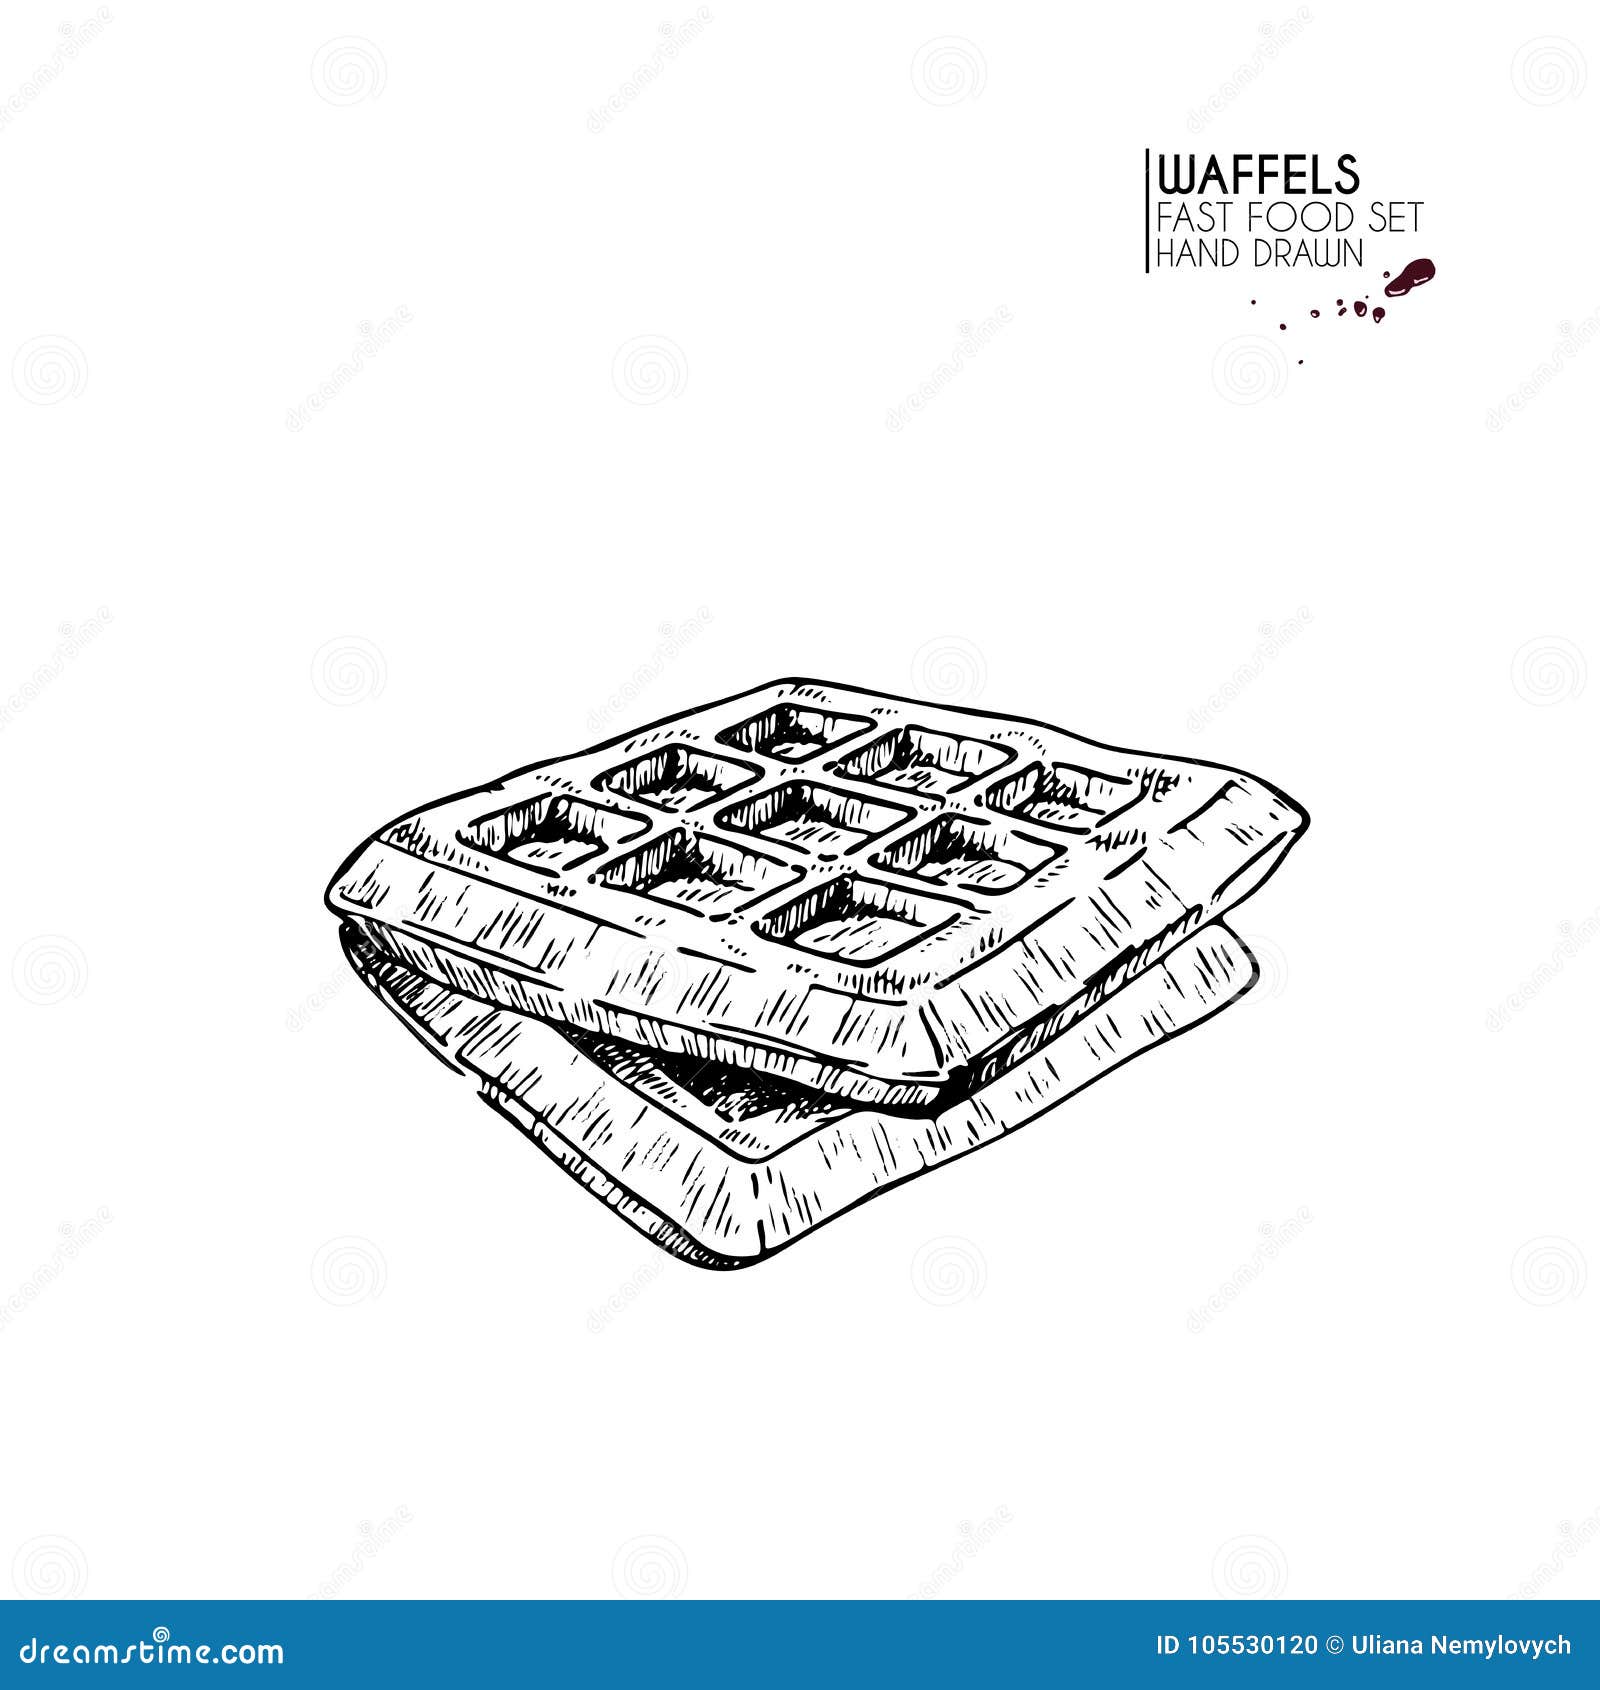 Hand Drawn Set Of Fast Food Sweet Belgian Waffles Breakfast Dessert Vintage Engraved Vector Illustration Isolated On Stock Vector Illustration Of Isolated Draw